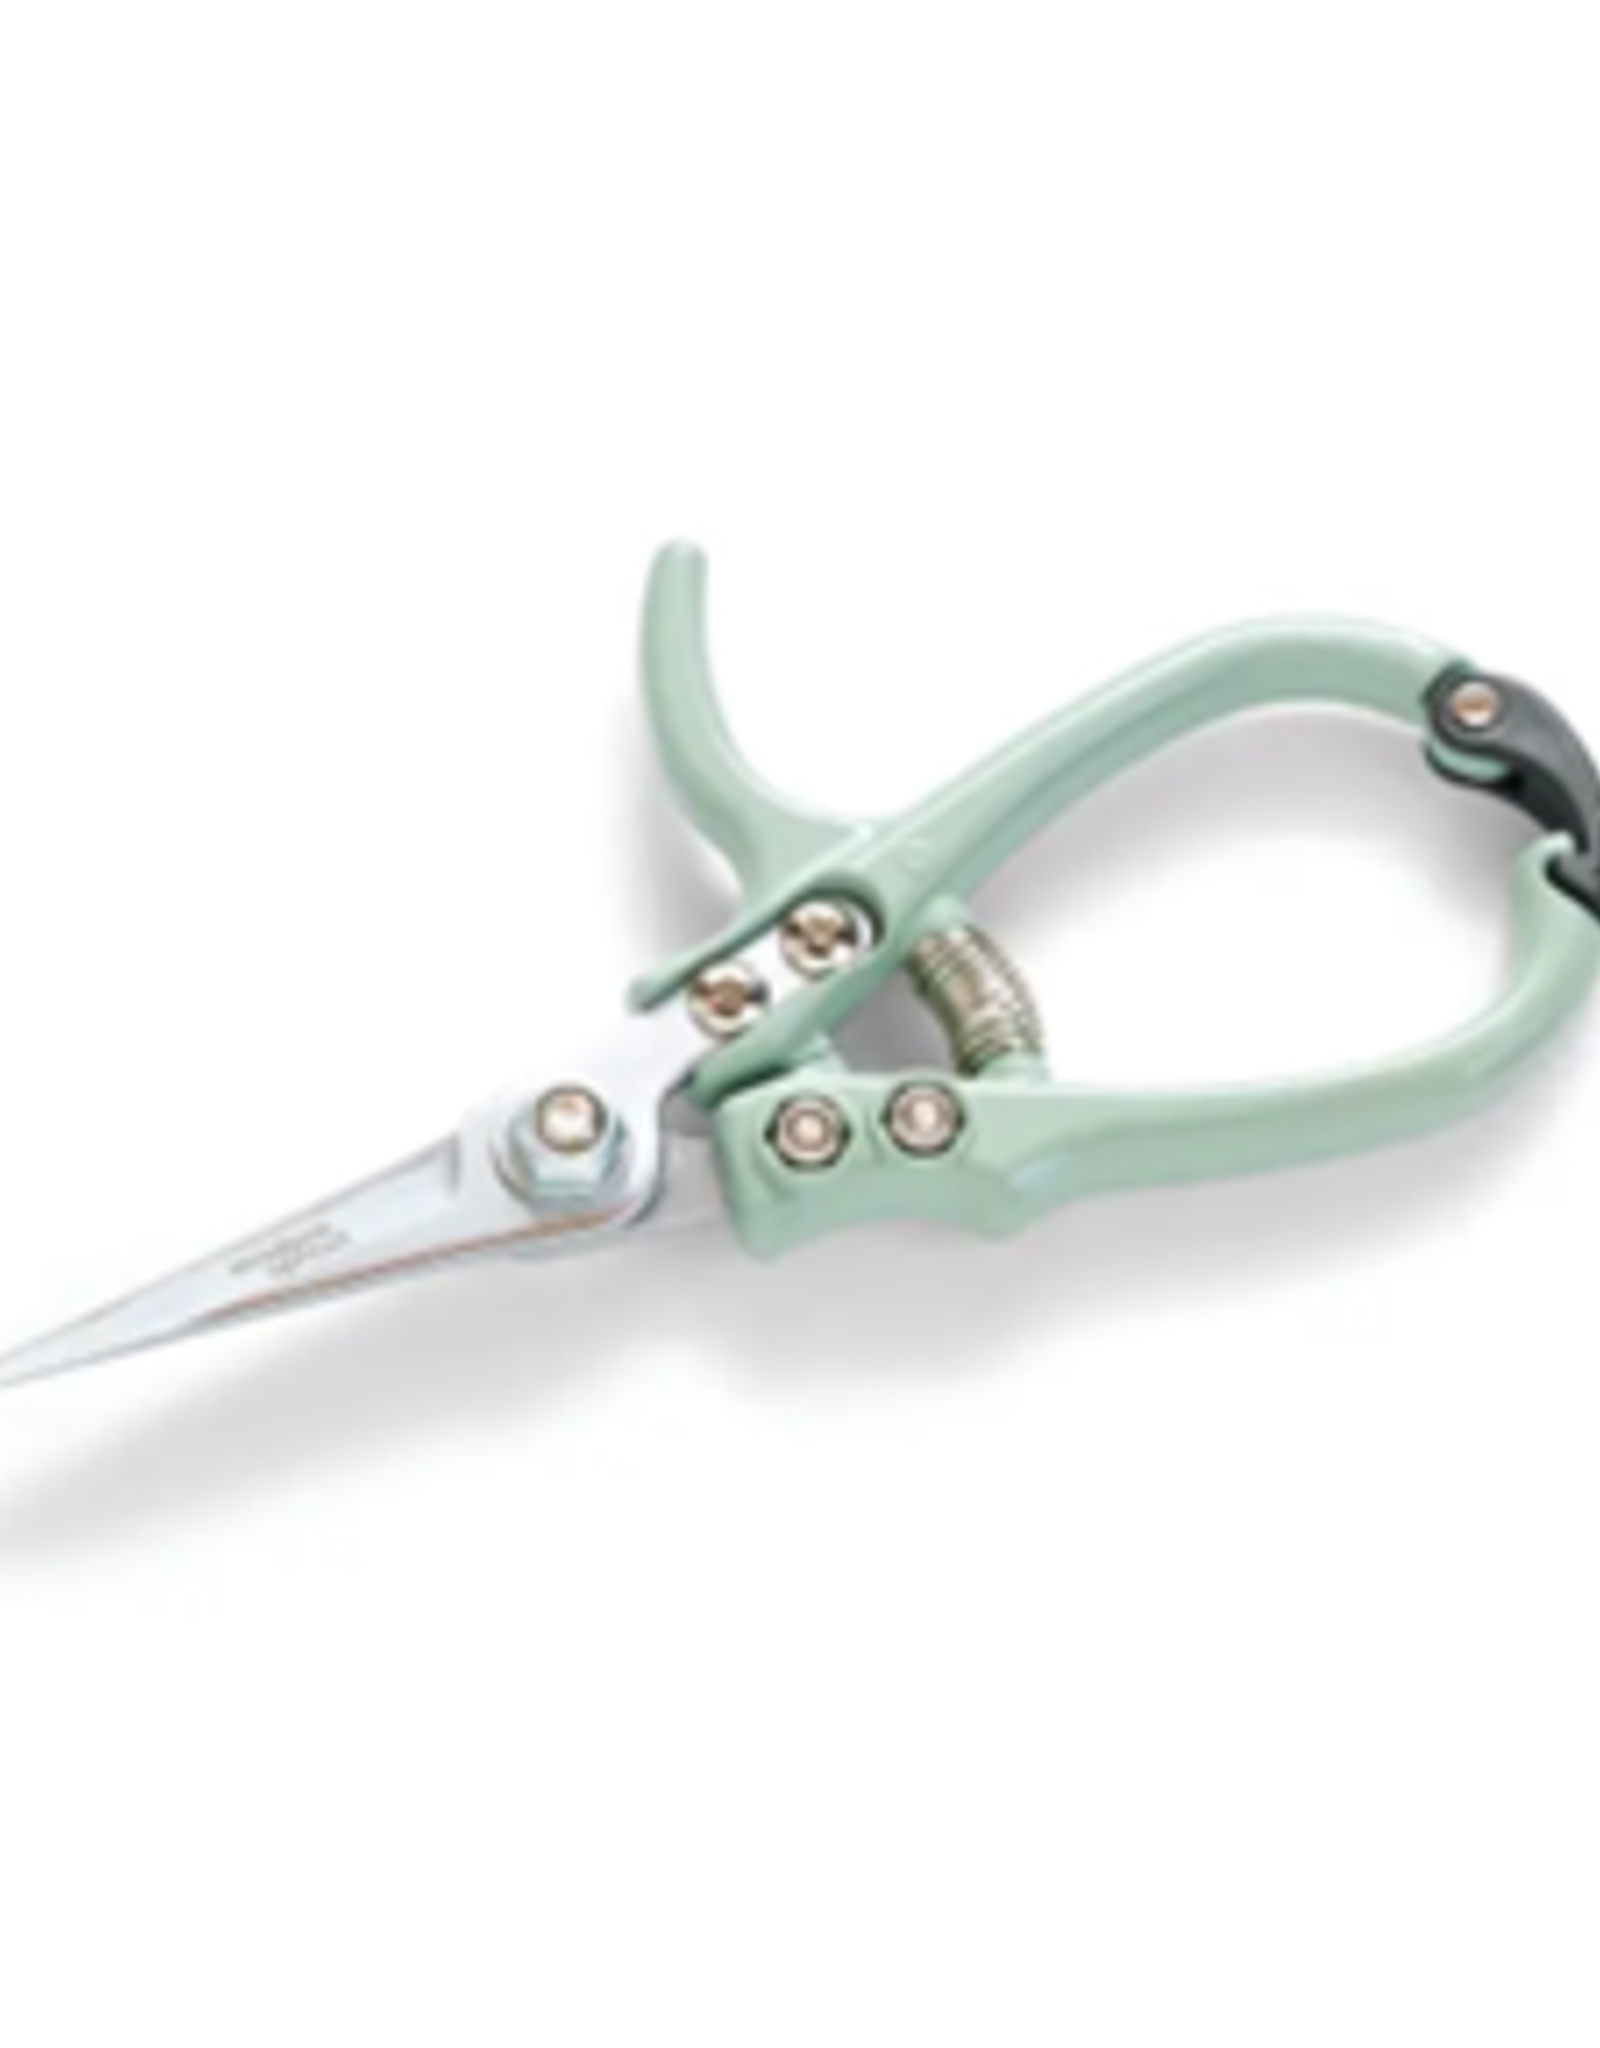 Modern Sprout Shears